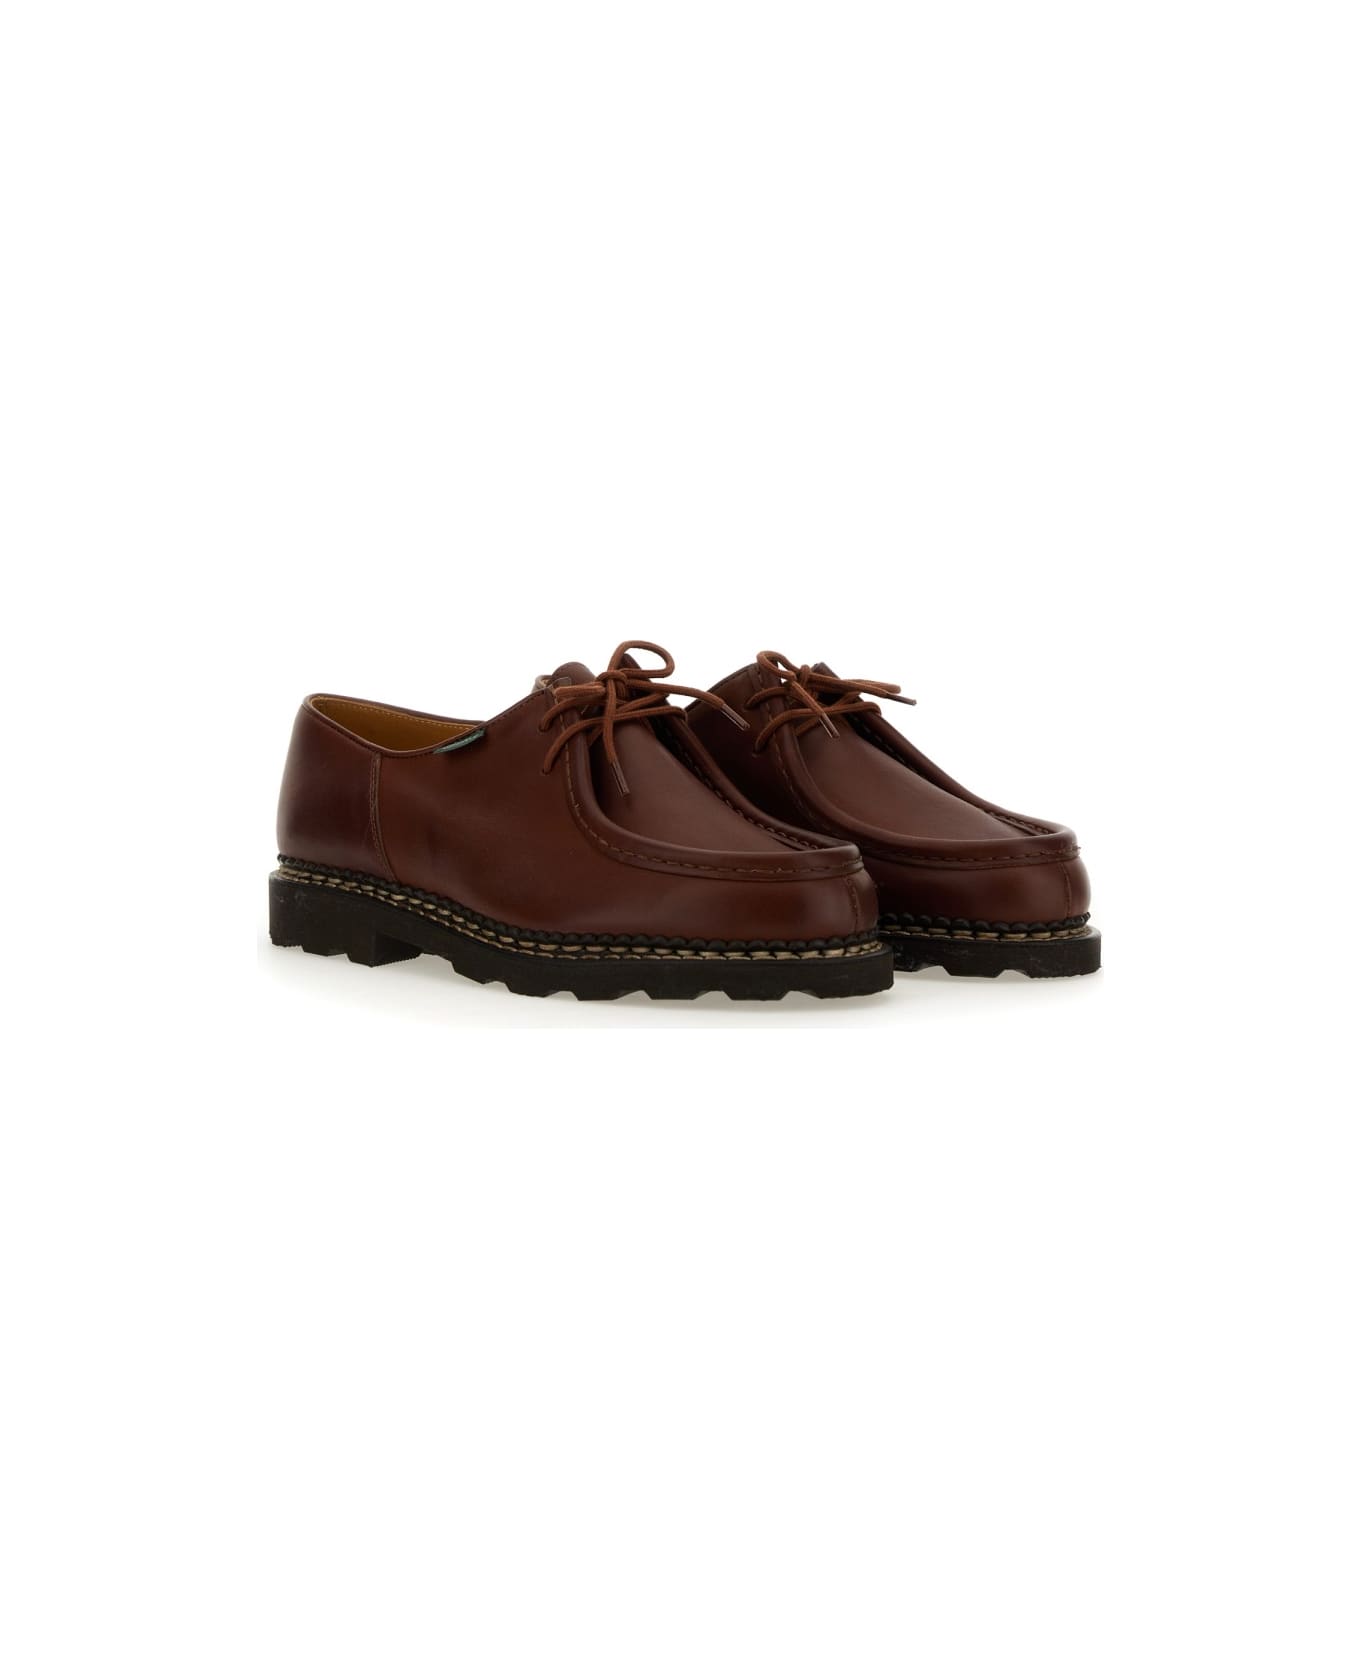 Paraboot Lace-up "michael" - BROWN ローファー＆デッキシューズ